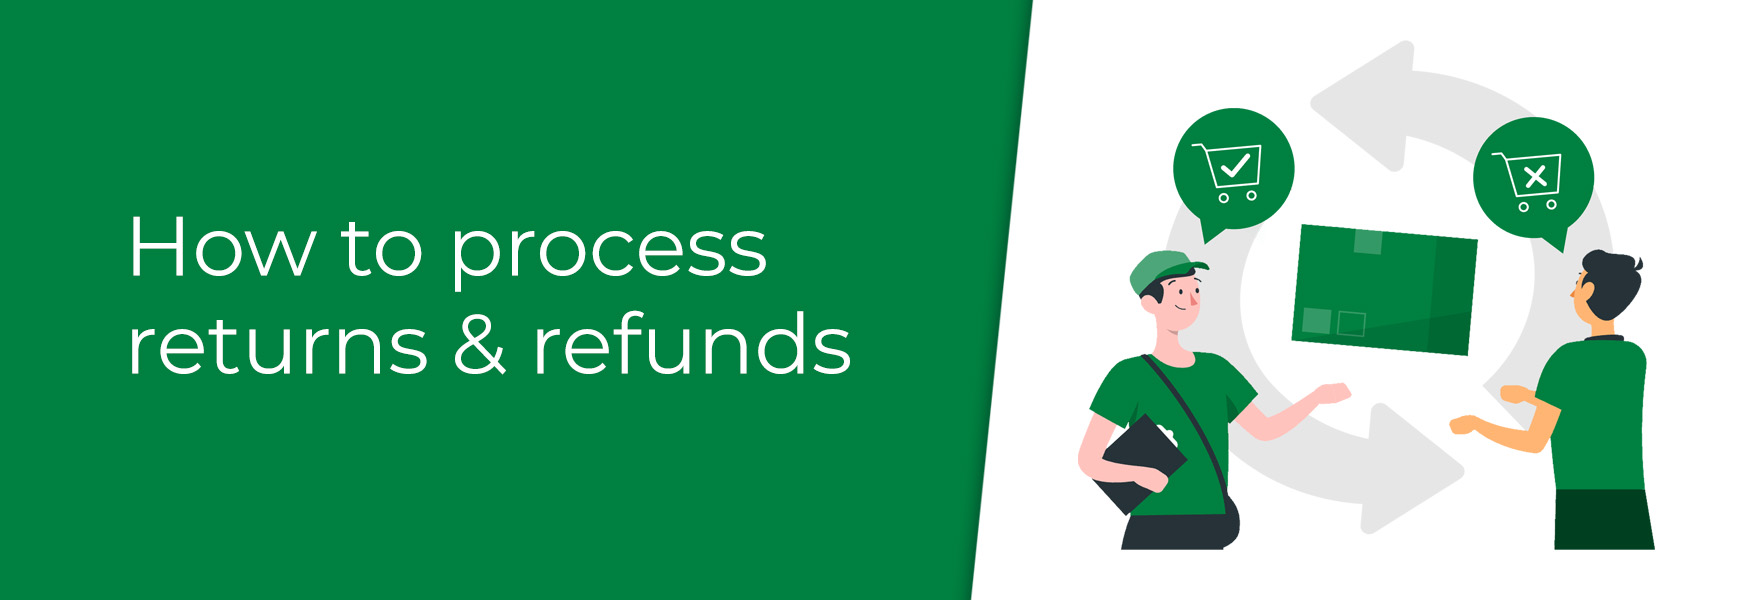 How to process returns & refunds